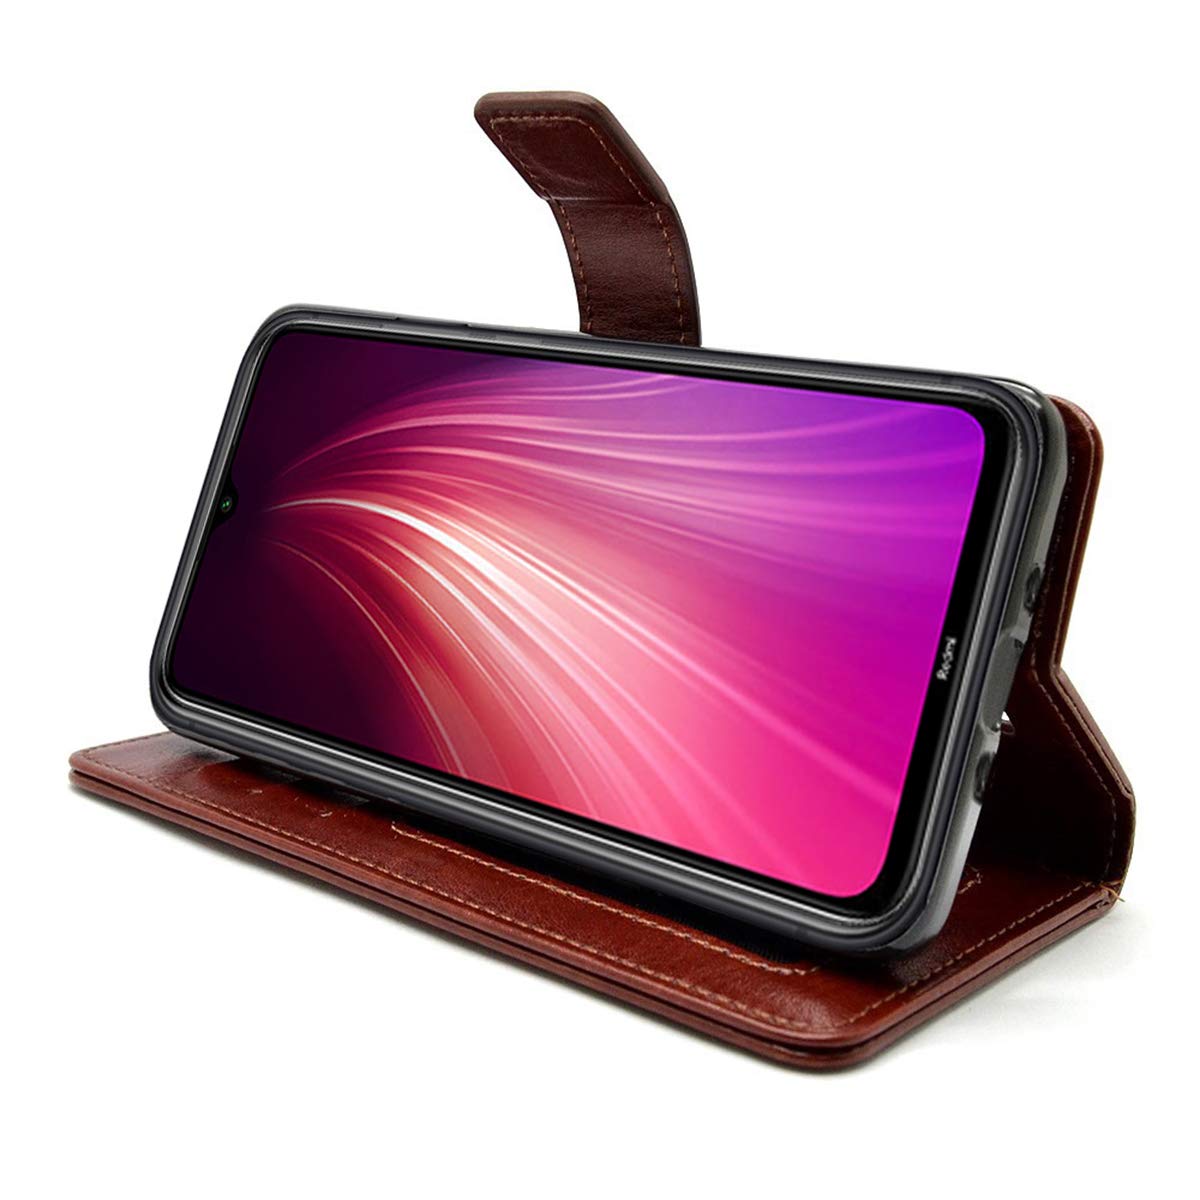 Bracevor Xiaomi Redmi Note 8 Flip Cover Case | Premium Leather | Inner TPU | Foldable Stand | Wallet Card Slots - Executive Brown